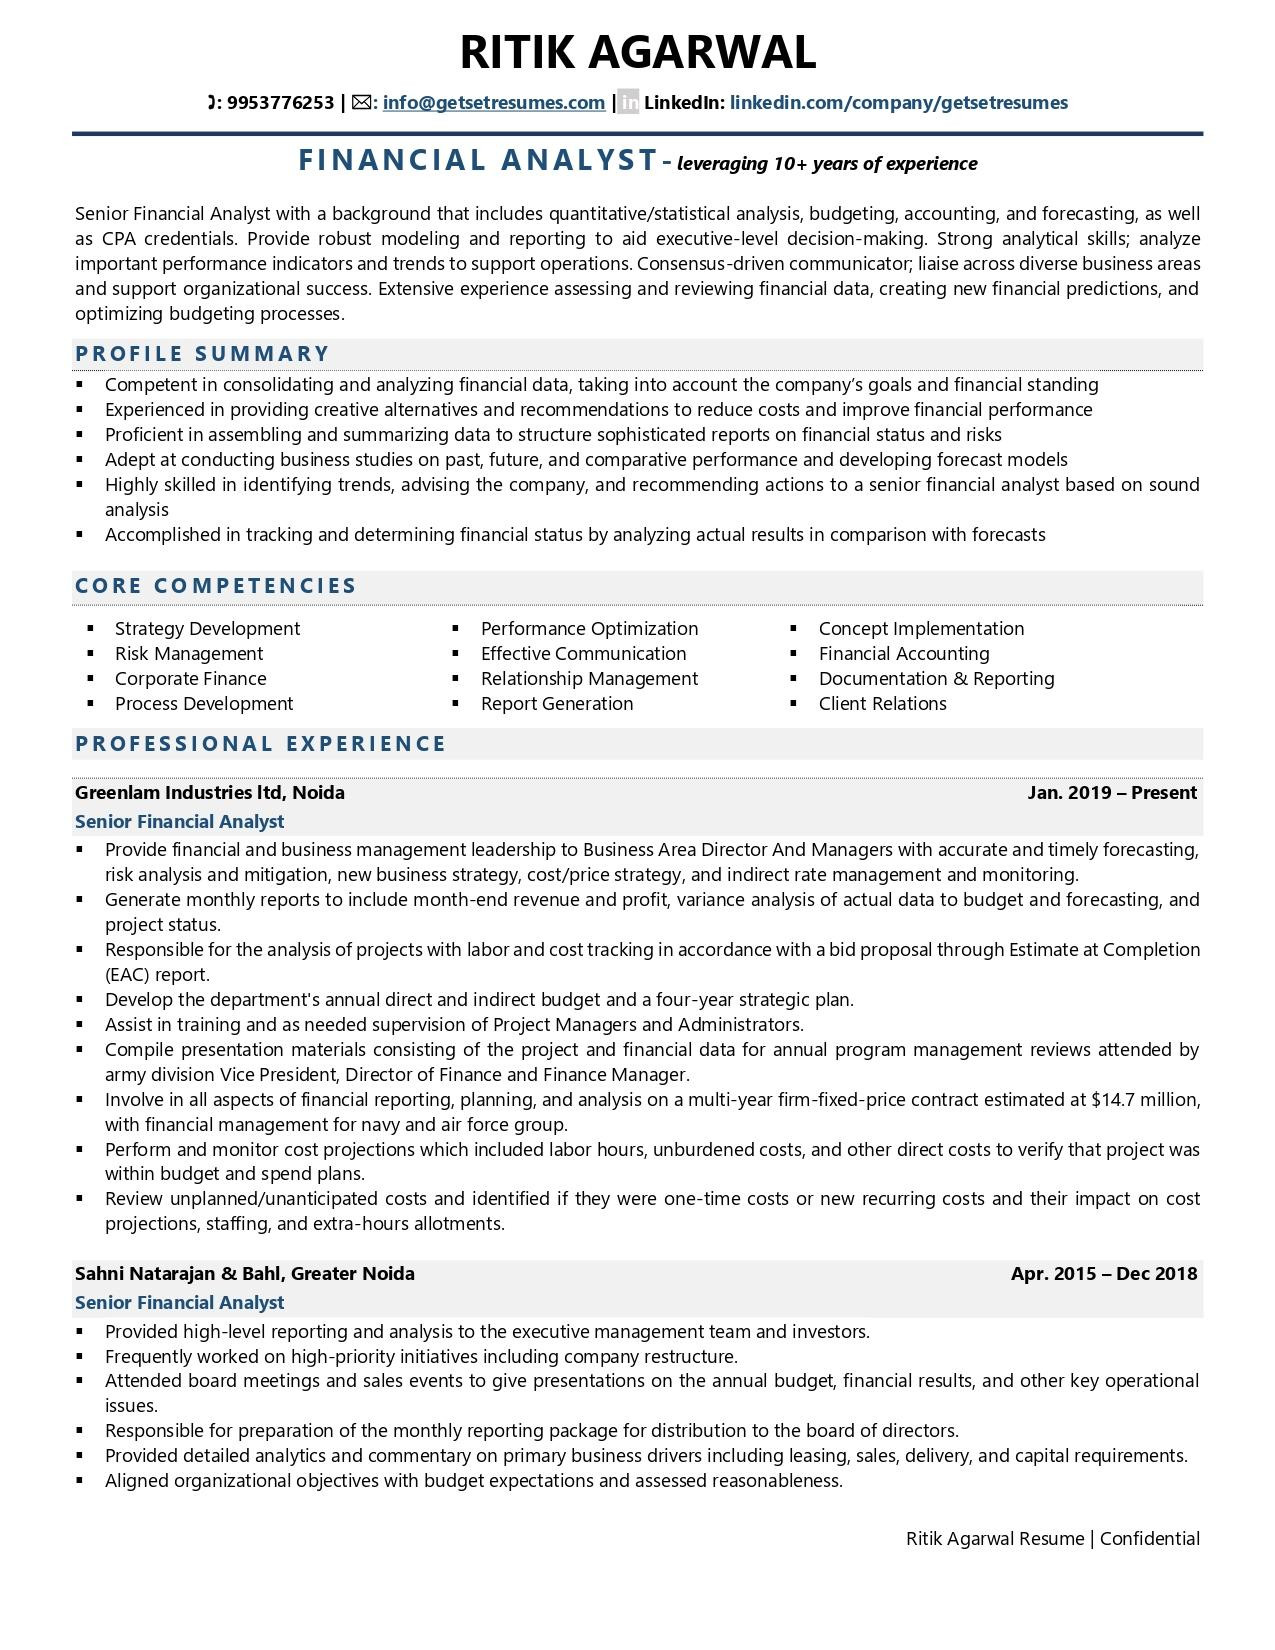 Sample Resume for Corporate Finance Analyst Financial Analyst Resume Examples & Template (with Job Winning Tips)